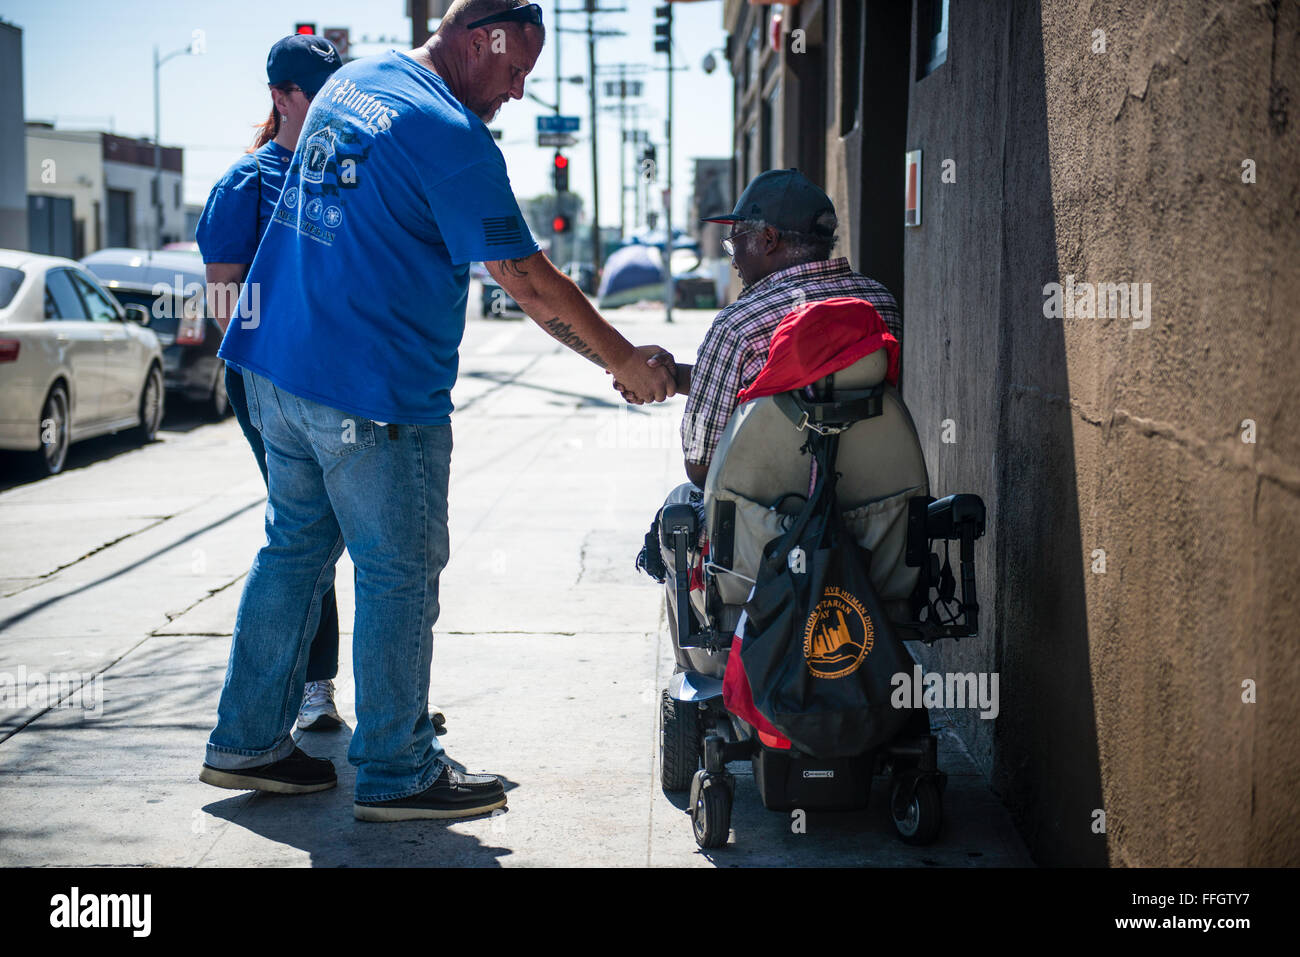 Vet Hunter Travis Goforth thanks and shakes the hand of a homeless man after getting details of the whereabouts of other homeless veterans on Skid Row. Skid Row is a 54-block area of Los Angeles with thousands of homeless individuals Stock Photo